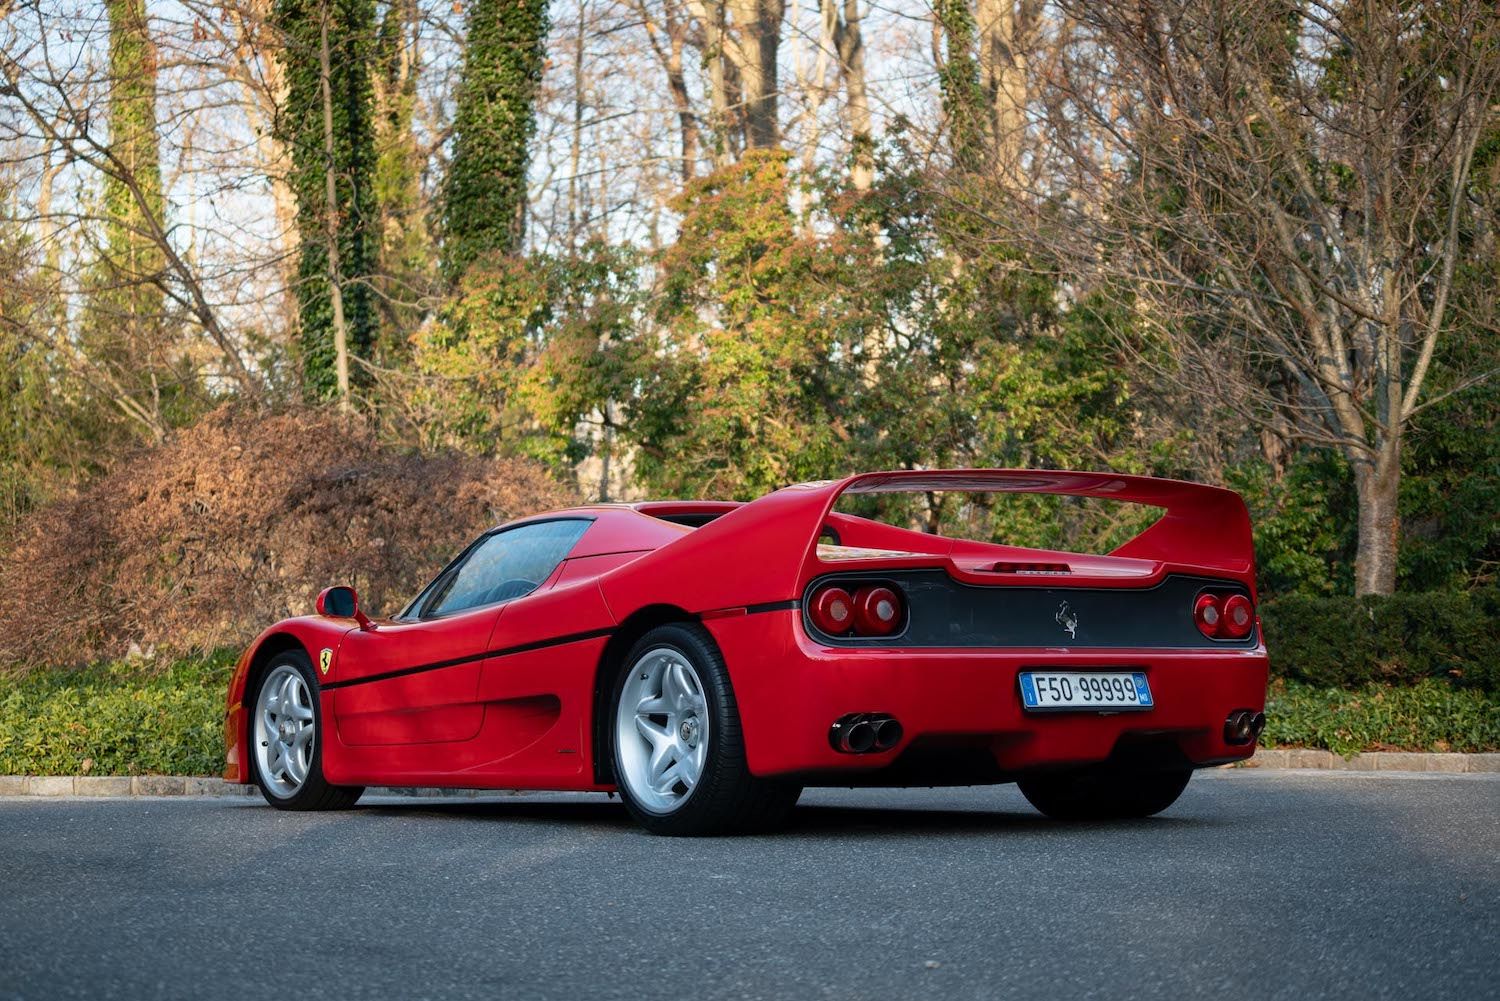 Ferrari F50 parked on vacant street left rear view